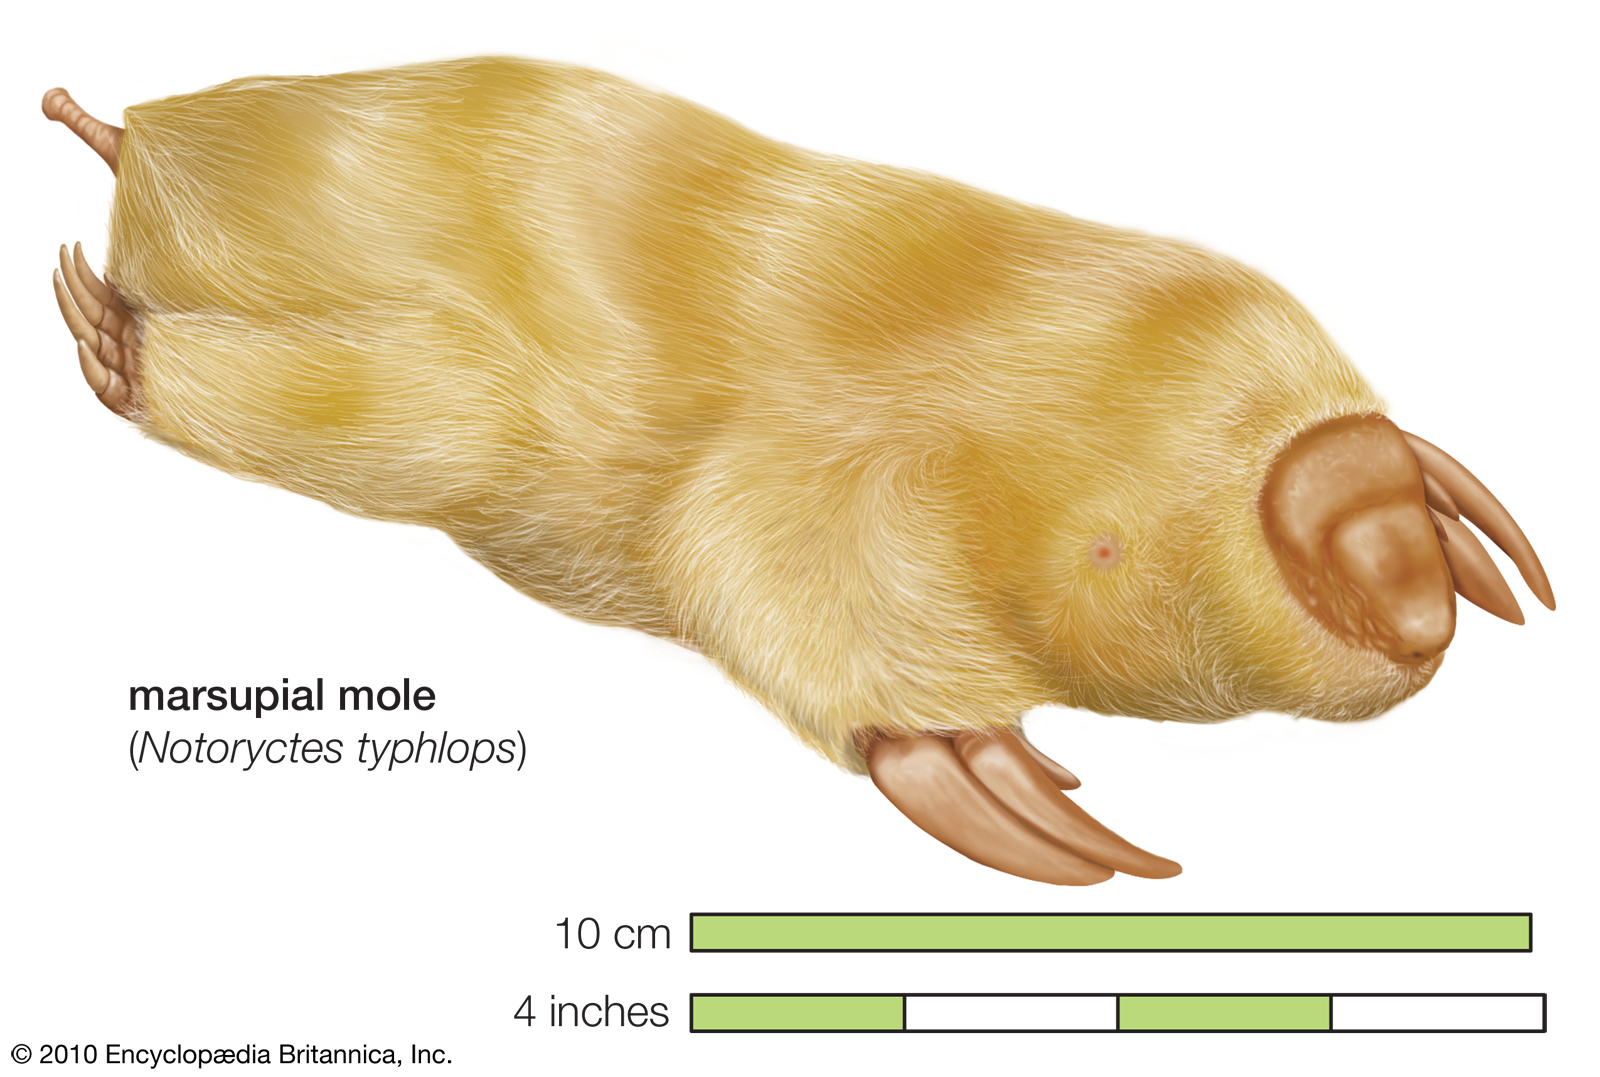 <p><span>This is a marsupial (has a pouch). Why does it have the form of a proper mole, even though it last shared a common ancestor with moles 70+ million years ago.</span></p><p><span>a) divergent evolution</span></p><p><span>b) convergent evolution</span></p><p><span>c) adaptability</span></p><p><span>d) gene flow</span></p>